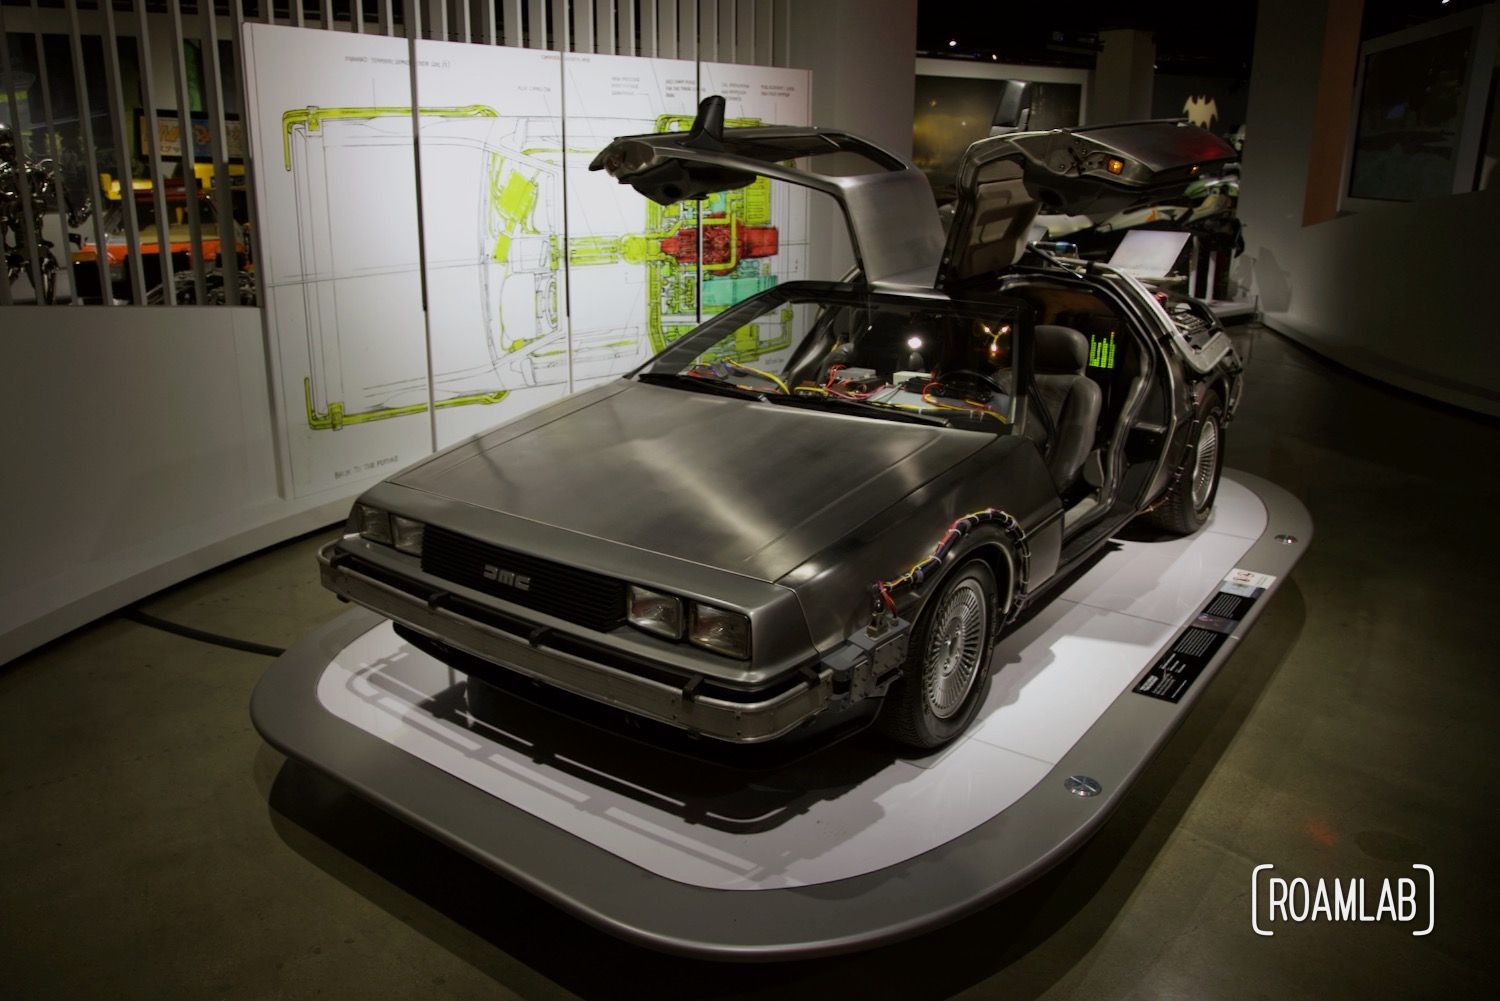 1981 DeLorean "Time Machine" on display at the Petersen Automotive Museum